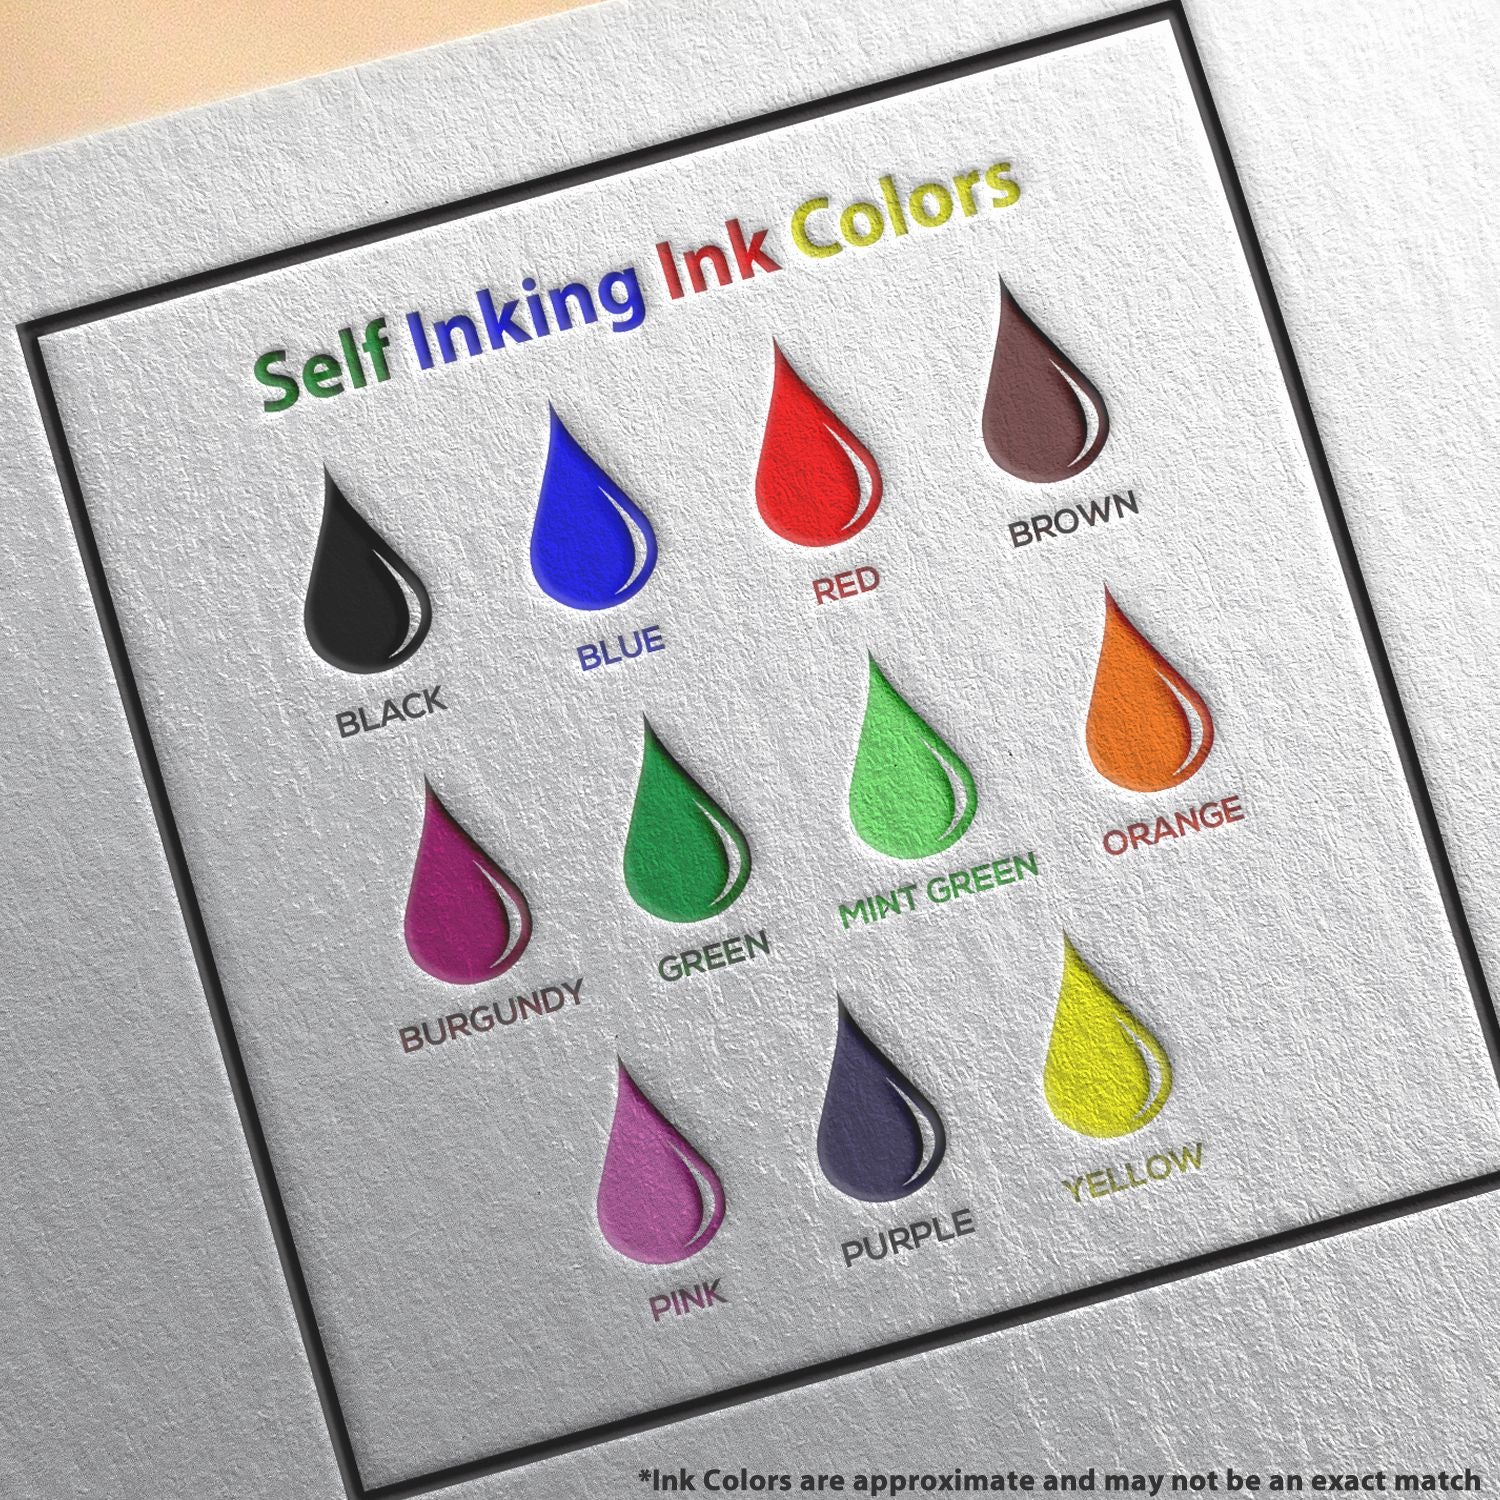 A picture showing the different ink colors or hues available for the Self-Inking Michigan Landscape Architect Stamp product.